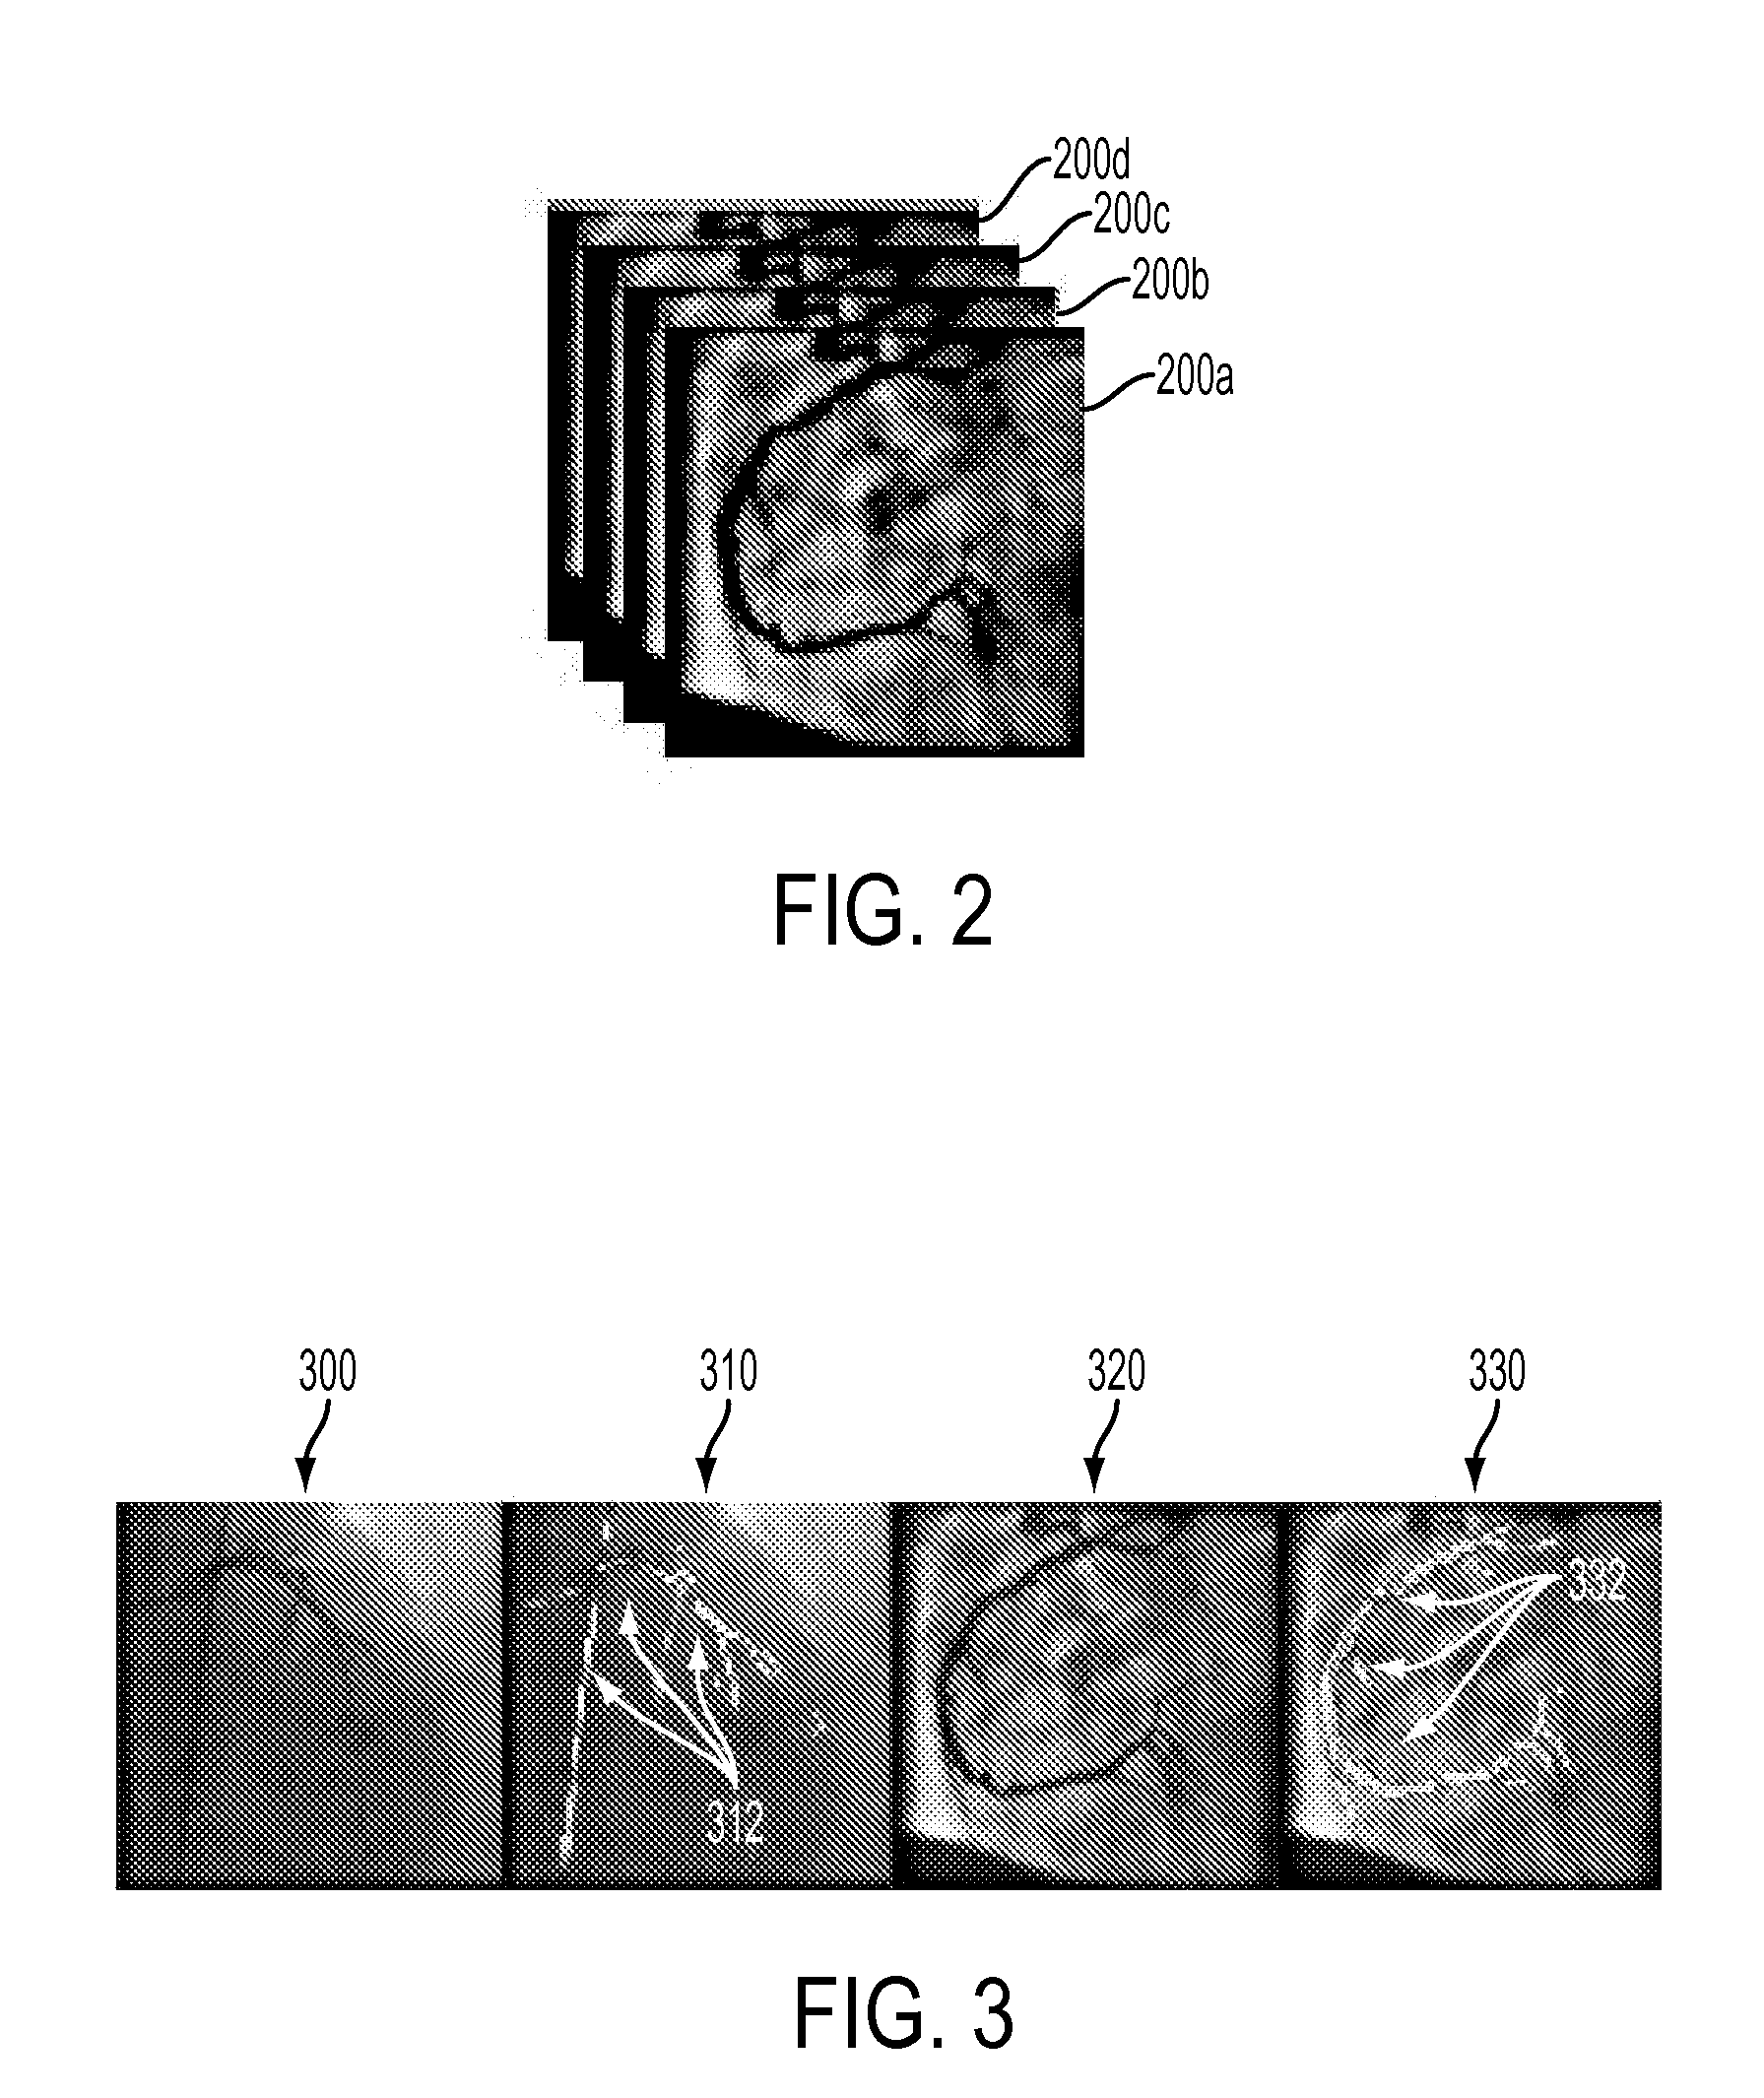 Method and System for Contrast Inflow Detection in 2D Fluoroscopic Images